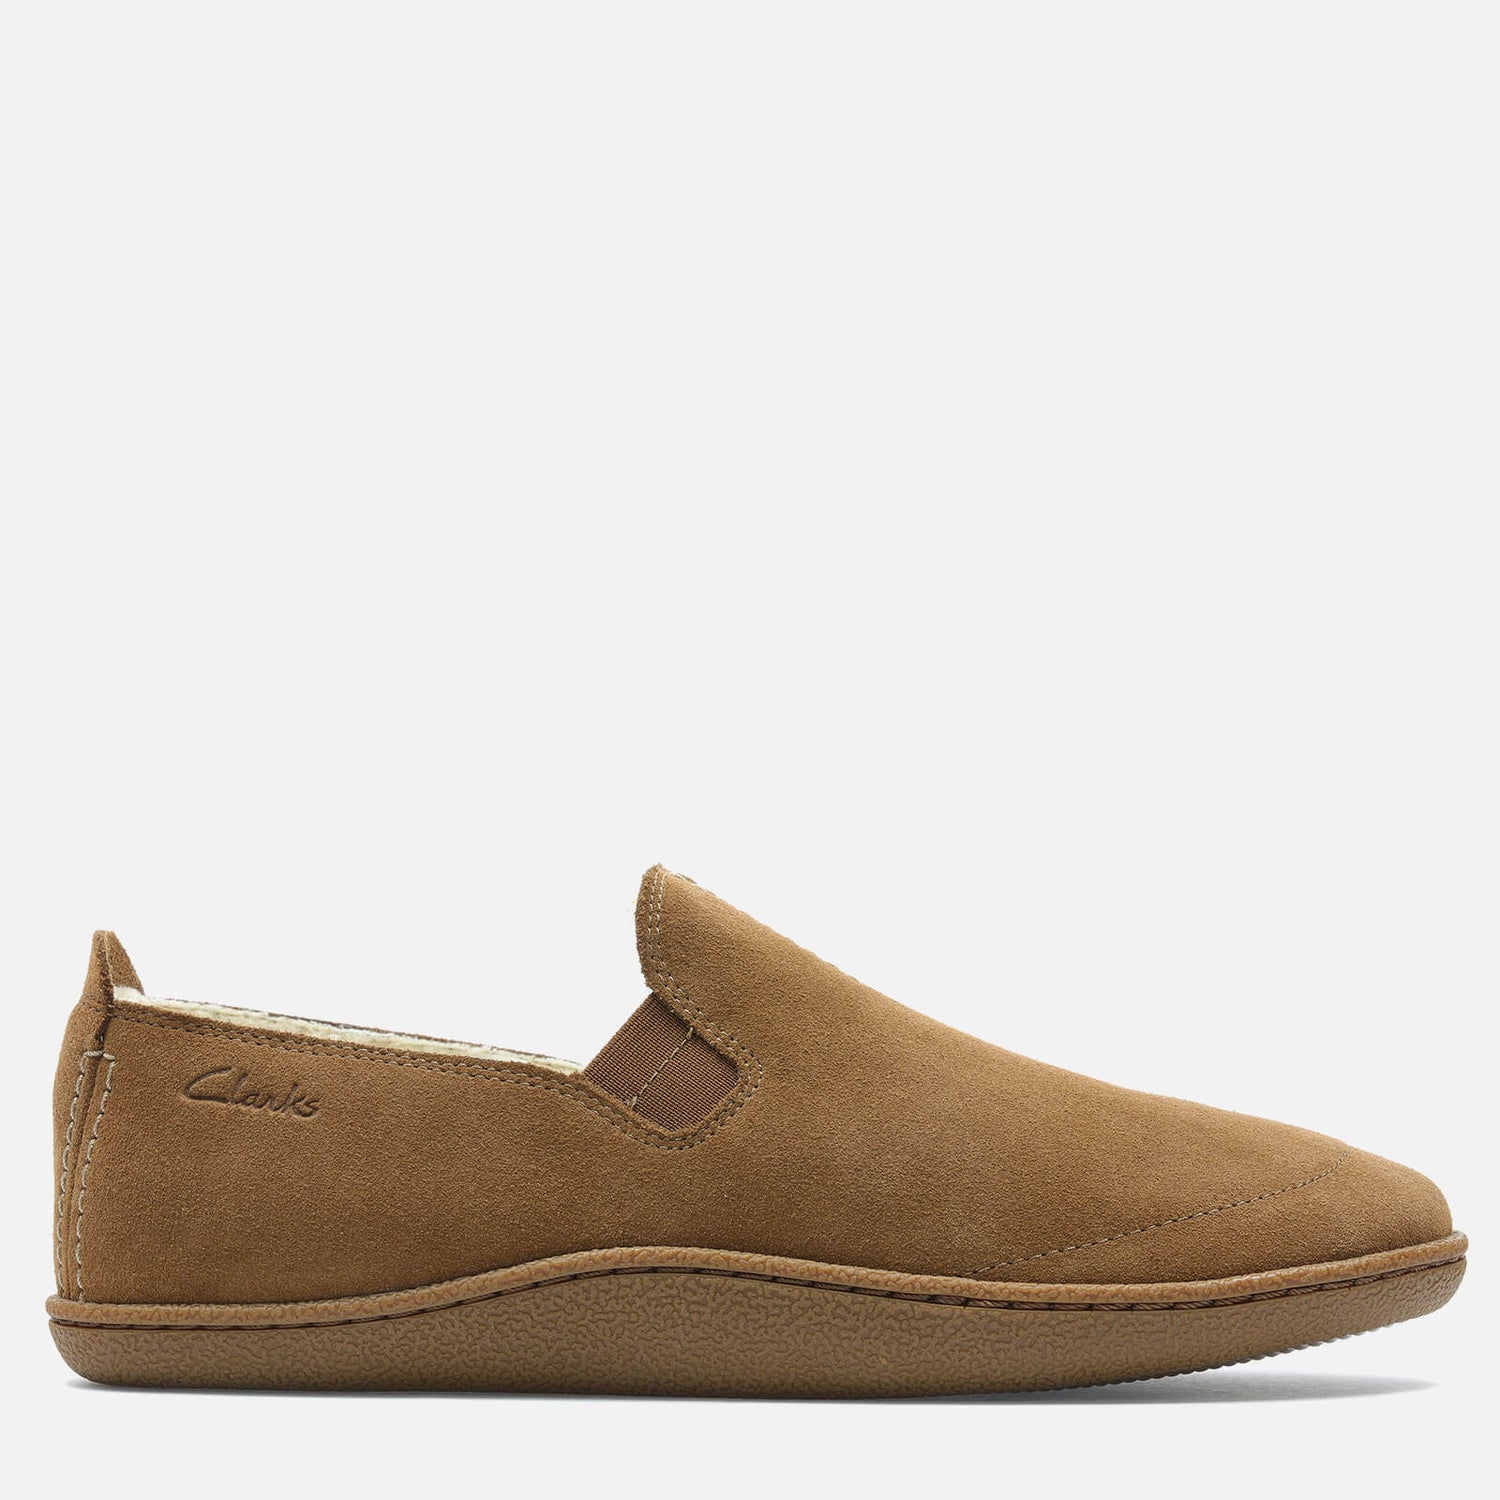 Clarks Home Mocc Suede Slippers - UK 7